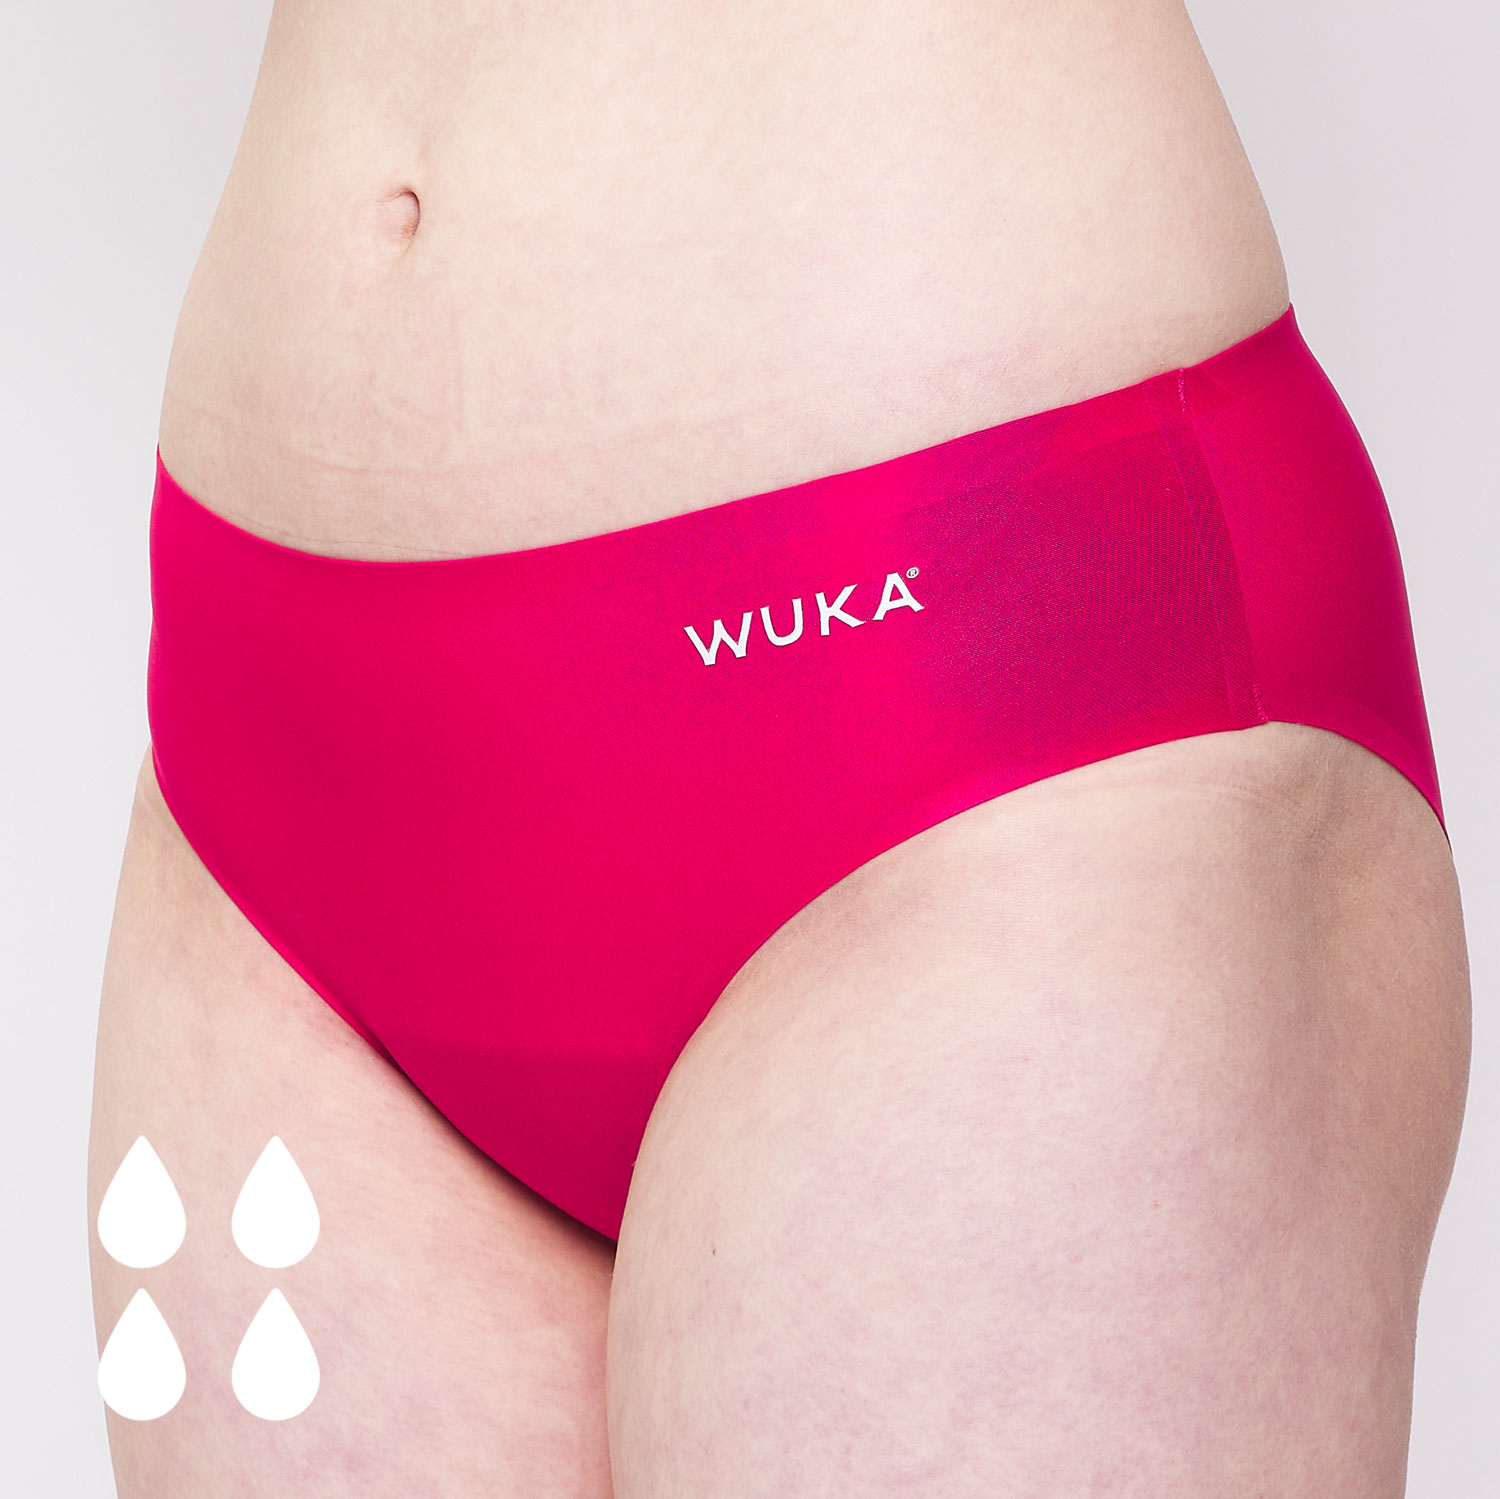 Shoppers are going wild for this 'seamless' underwear that stays